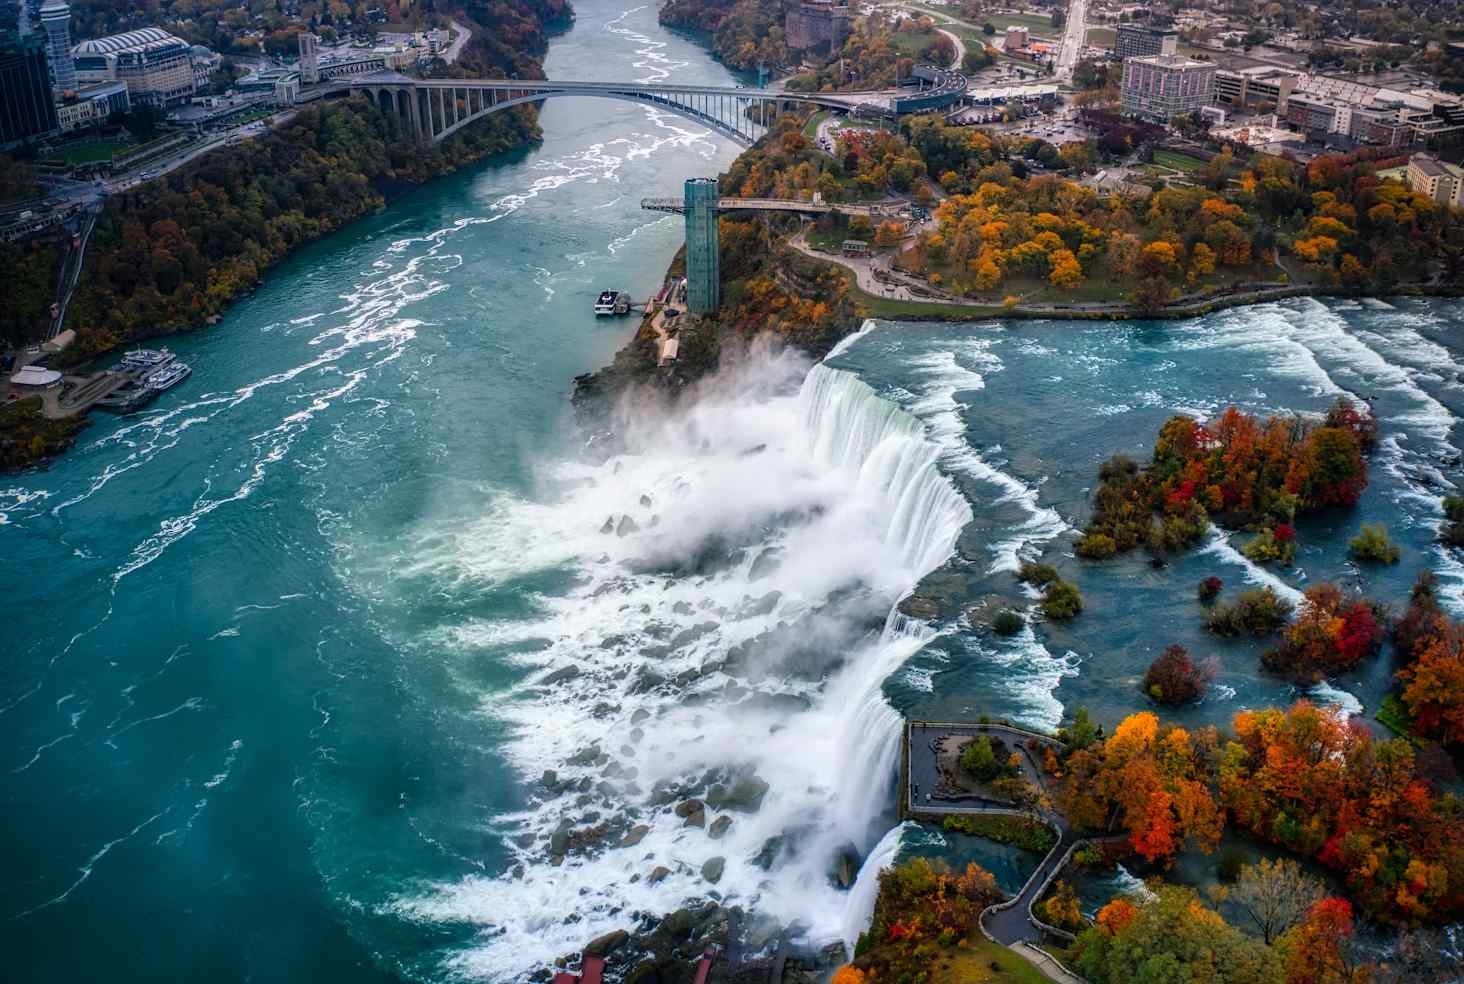   How To Plan A Trip To Niagara Falls - A Complete Guide.jpg